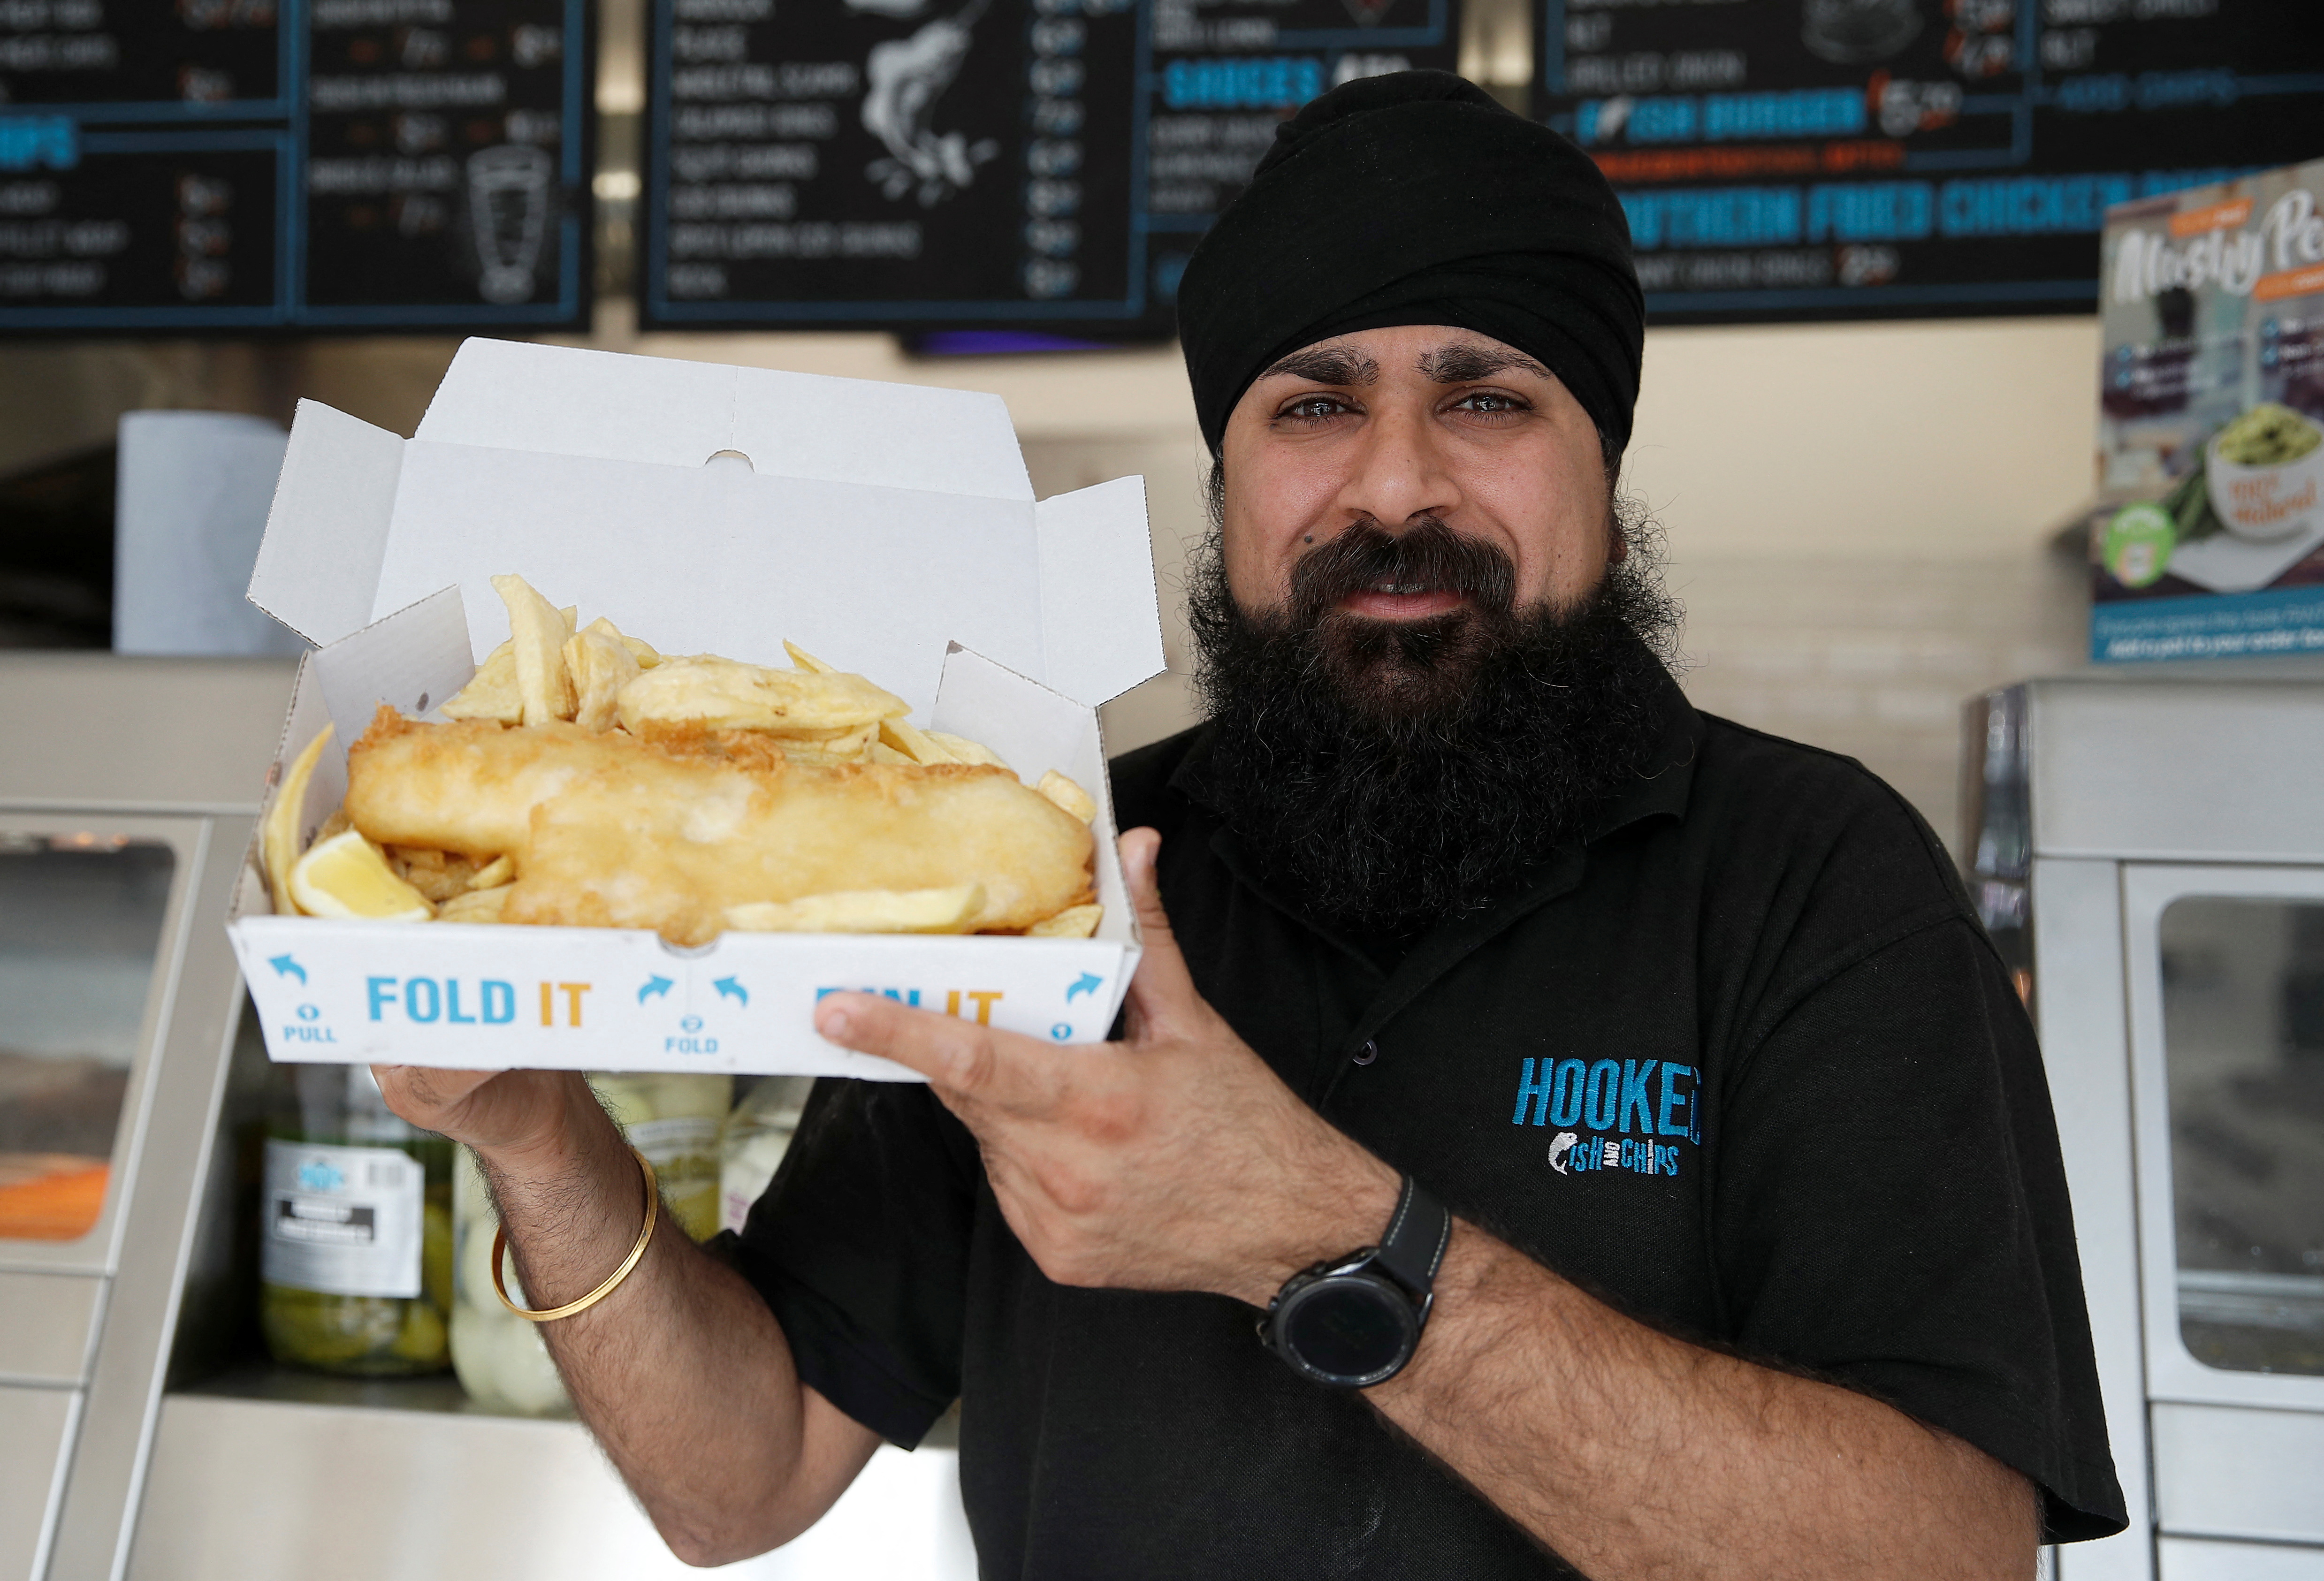 Owner of Hooked Fish and Chips shop, Bally Singh, holds a portion of fish and chips at his take-away in West Drayton